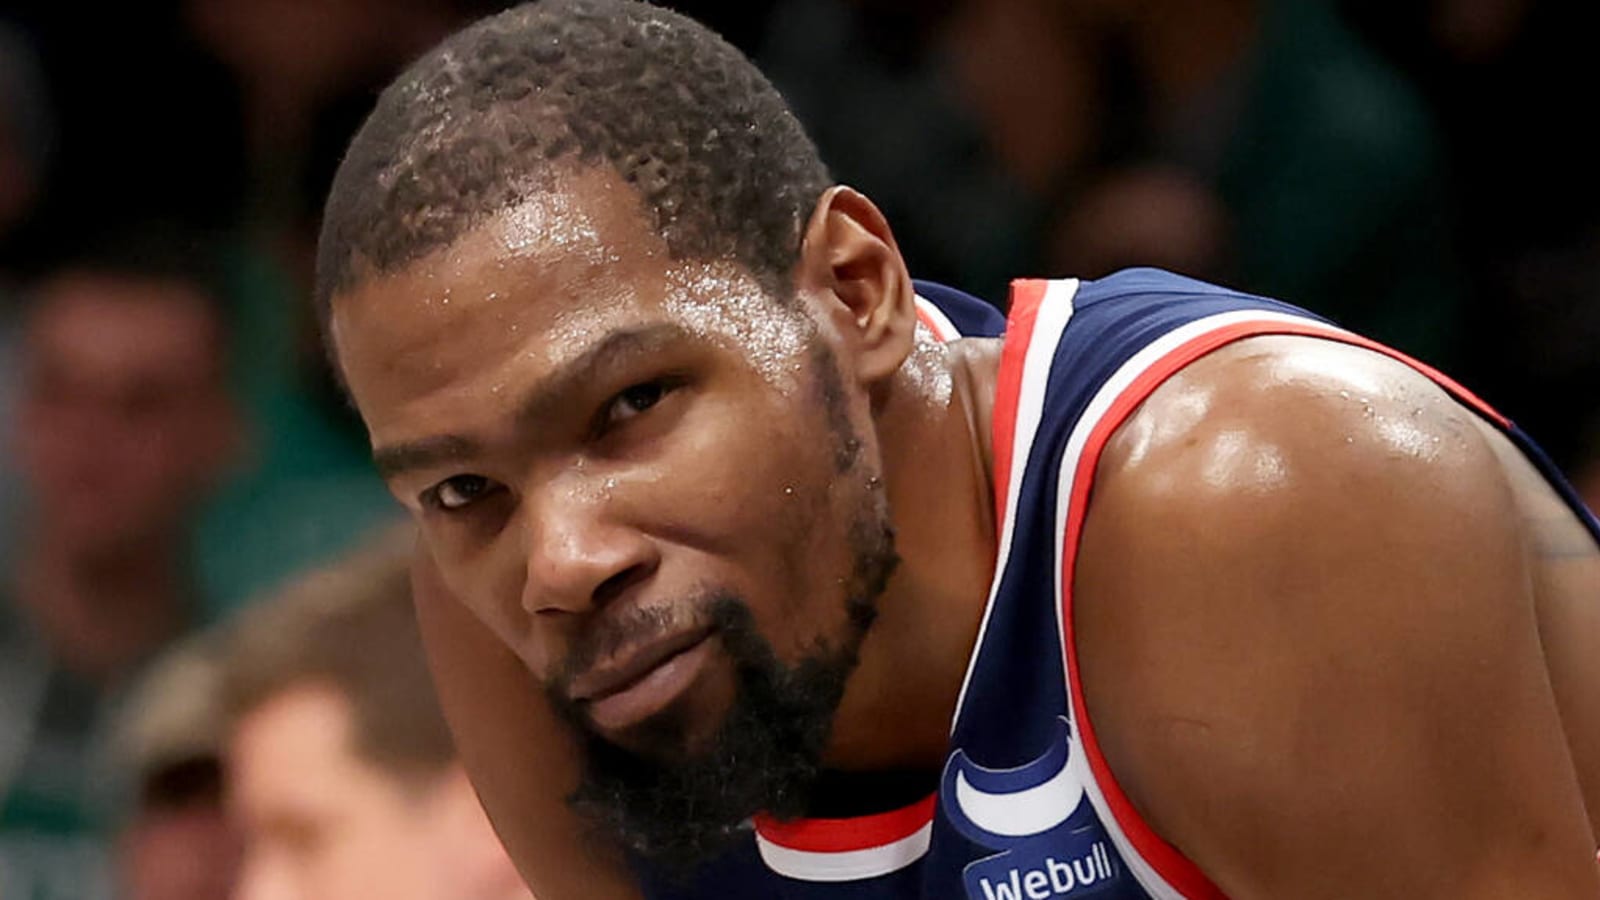 Kevin Durant booed at EuroLeague playoff game